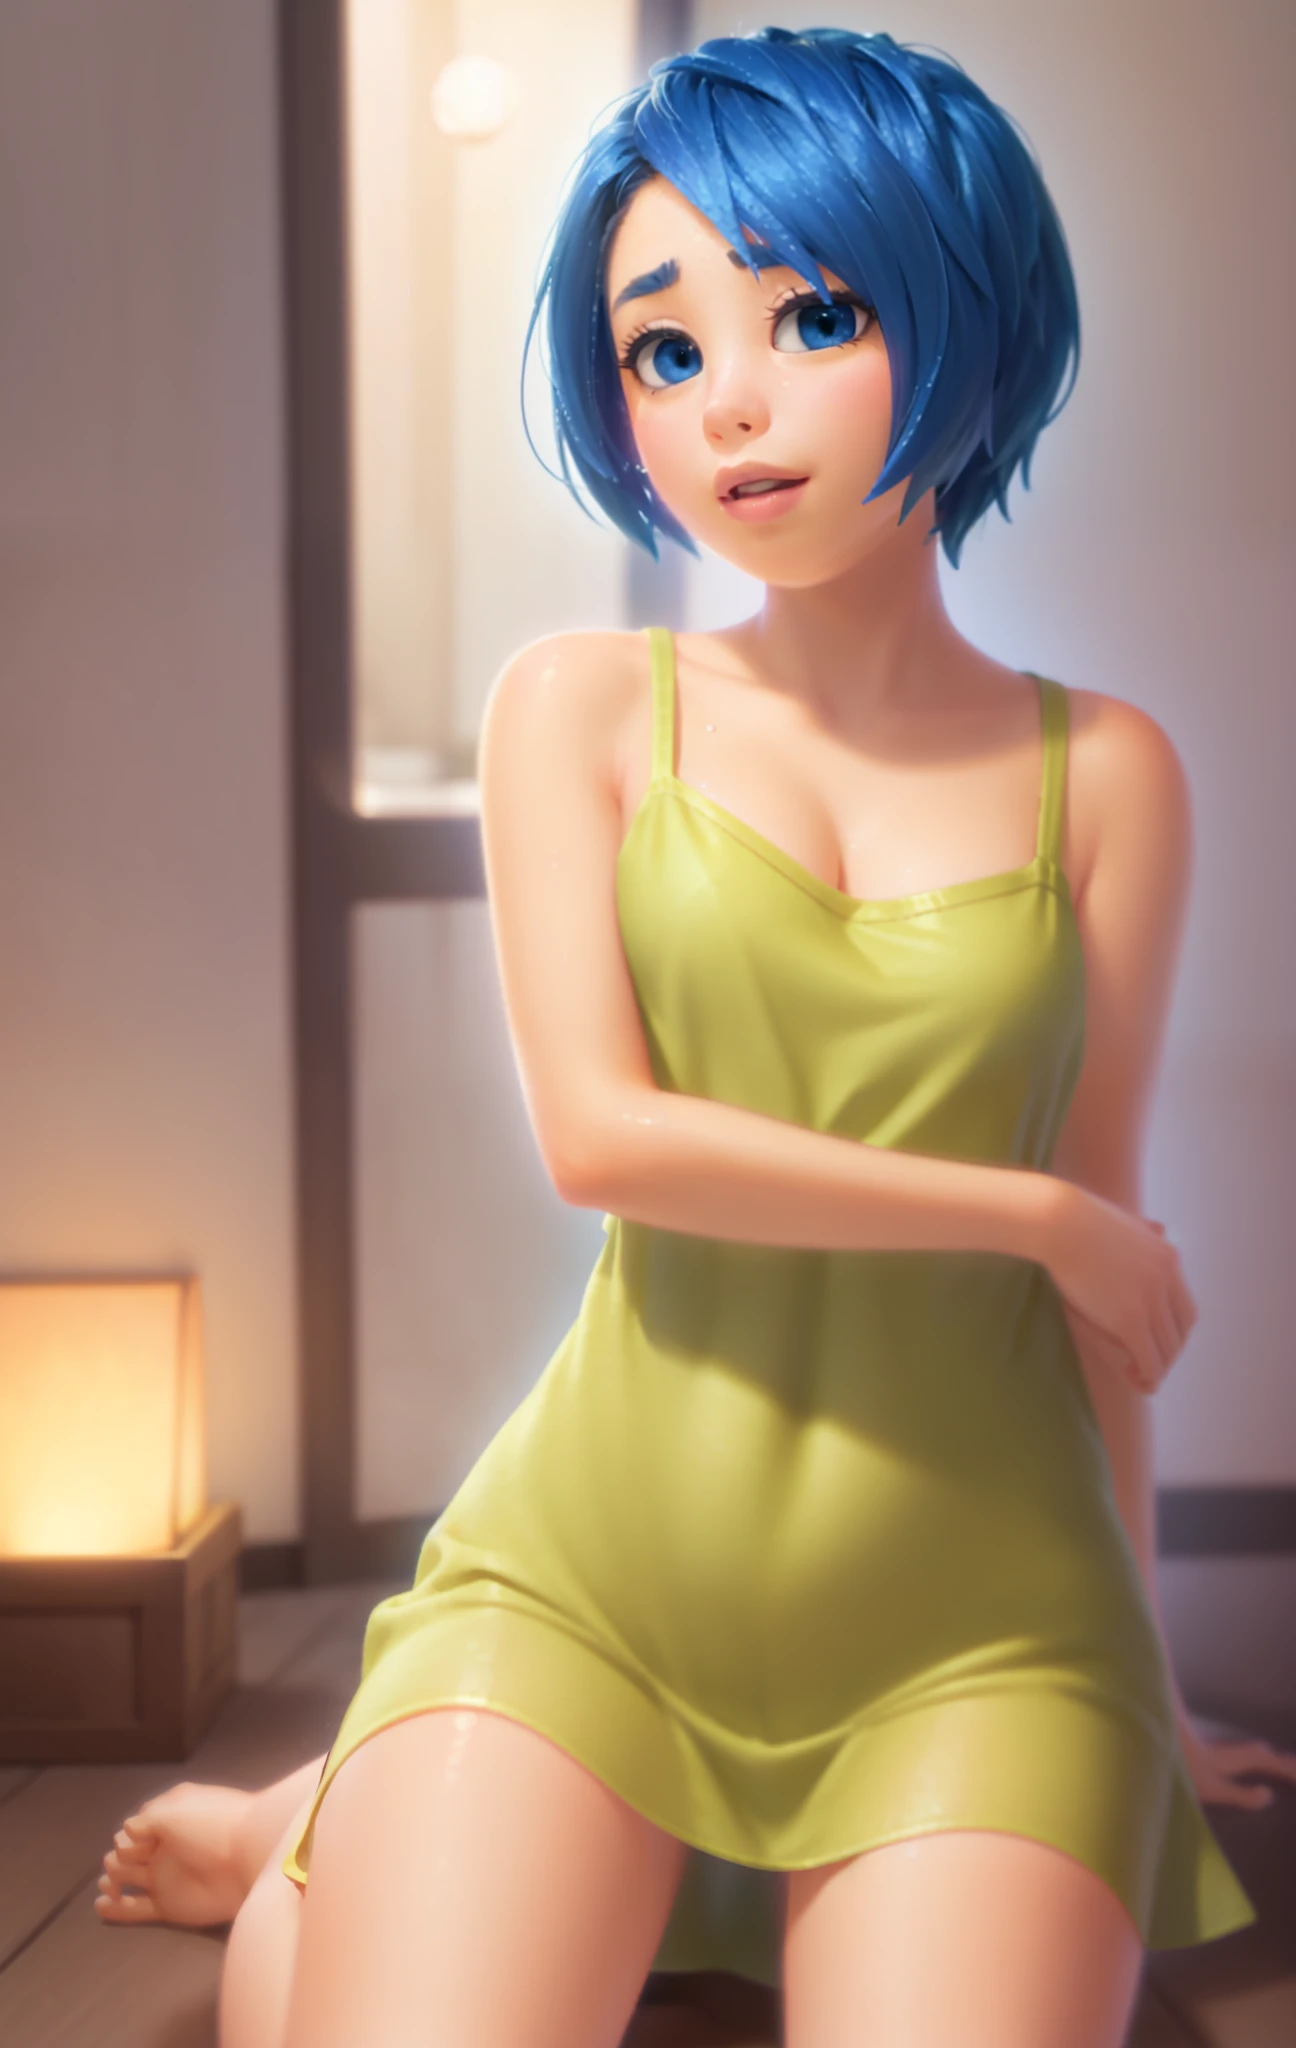 Masterpiece, Best Quality, (joying_Inside out, yellow skin, ), Happy, wet transparent mini green dress, Pixar, cartoony, 3D Rendering, little chest, sexy expression, bare footed, panty, showing panties, panties visible, ((Masterpiece)),((Best Quality)),absurdress, Sunlight, (half closed eyes:0.4), (parted lips:1.4), (nose blush:1.2), slight smile, foreshortening, looking at viewer, blackcutoffs, (eye contact), masterpiece, high contrast, best quality, ultra high res, high resolution, detailed, (parted lips:1.4), (nose blush:1.2), breasts visible, Showing breasts, (cinematic lighting), ((high-angle view)), (half body shadow), [backlighting], [crepuscular ray], [detailed ambient light], [gray natural lighting], [ambient light on the belly], (higher wildlife feral detail), [explict content], [sharp focus], (questionable content), (shaded), ((masterpiece), Commission for High Res, masterpiece, best quality, detailed image, bright colors, detailed face, perfect lighting, perfect shadows, perfect eyes, girl focus, flawless face, gorgeous body, shiny body, center focus, gaze at the viewer, 1girl, solo, (masterpiece:1.21), (best quality:1.2), (illustration:1.2), (cinematic lighting:1.3), balanced coloring, global illumination, ray tracing, good lighting, cleavage, attractive body, sexy body, looking at viewer, SFW, portrait close up, upper body portrait